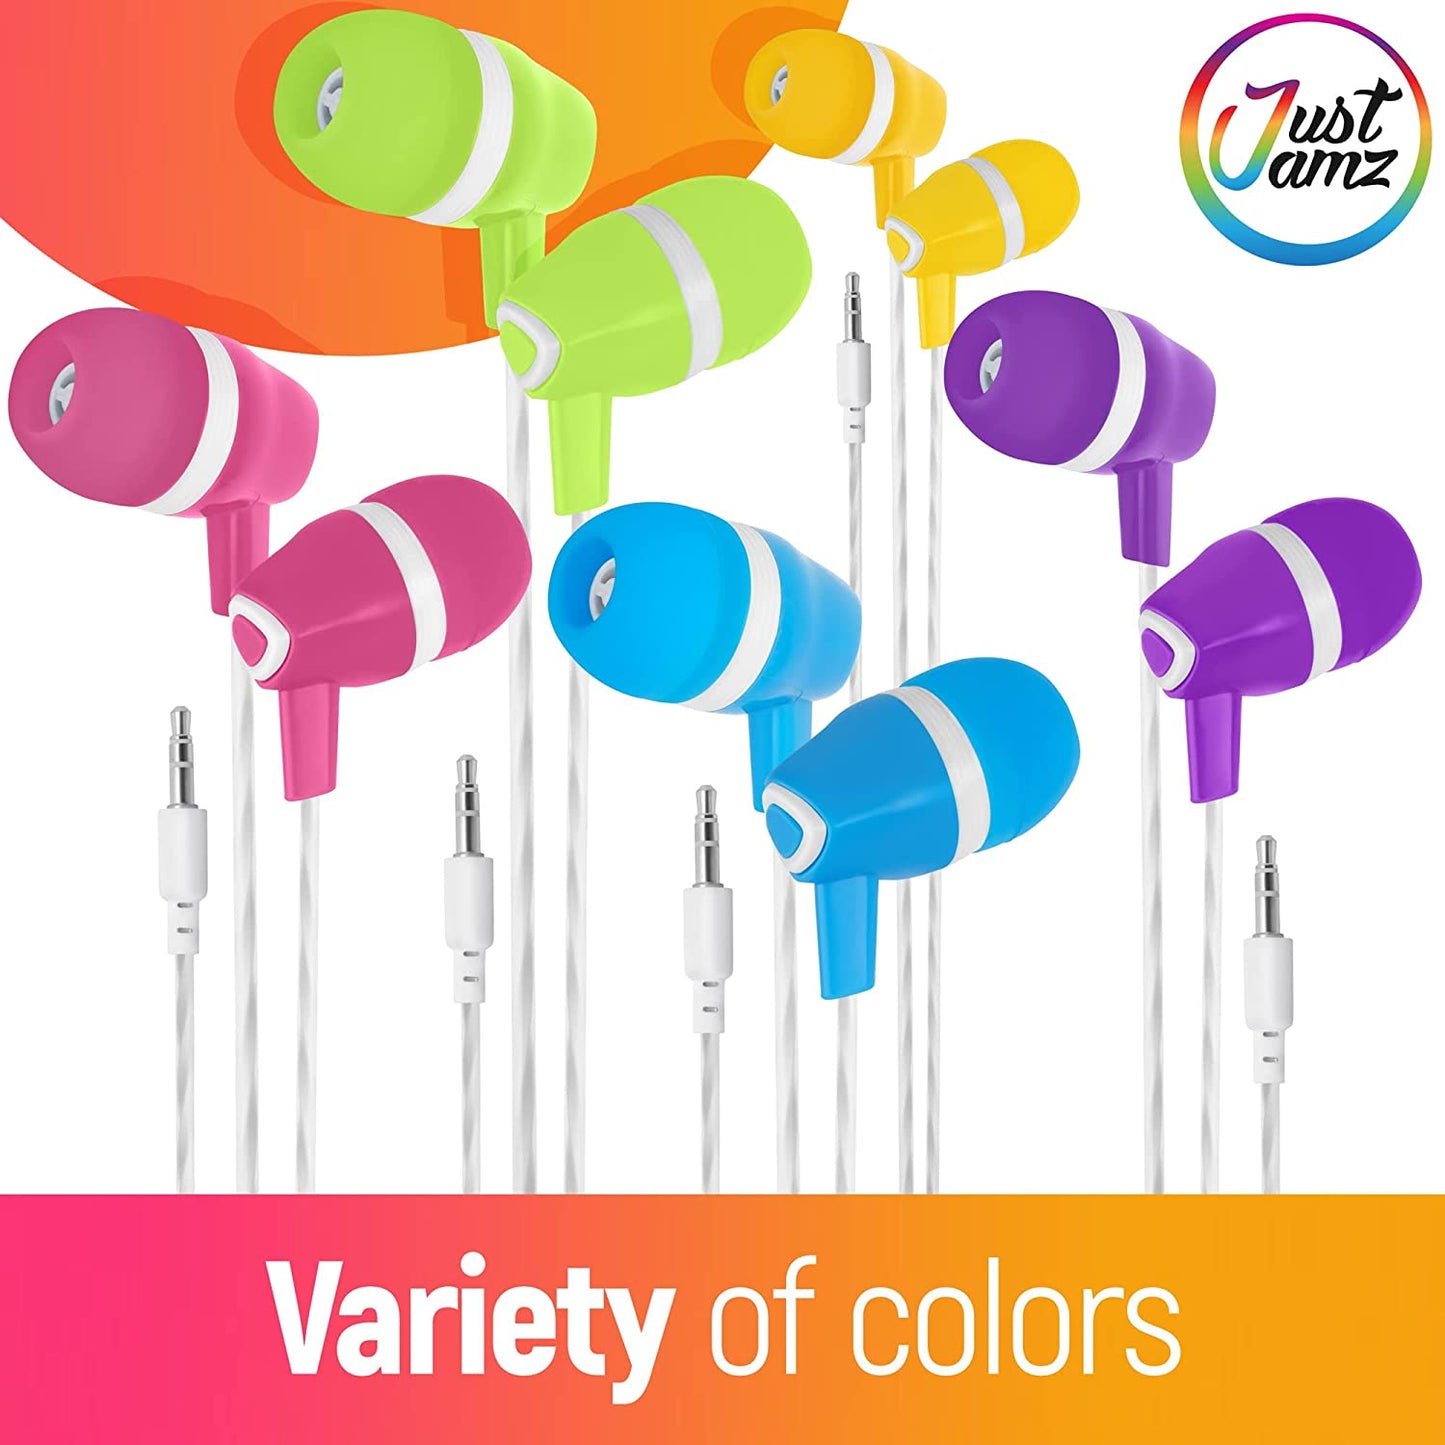 50 Pack of JustJamz Bubbles, Colorful in-Ear Earbuds, Assorted Colors